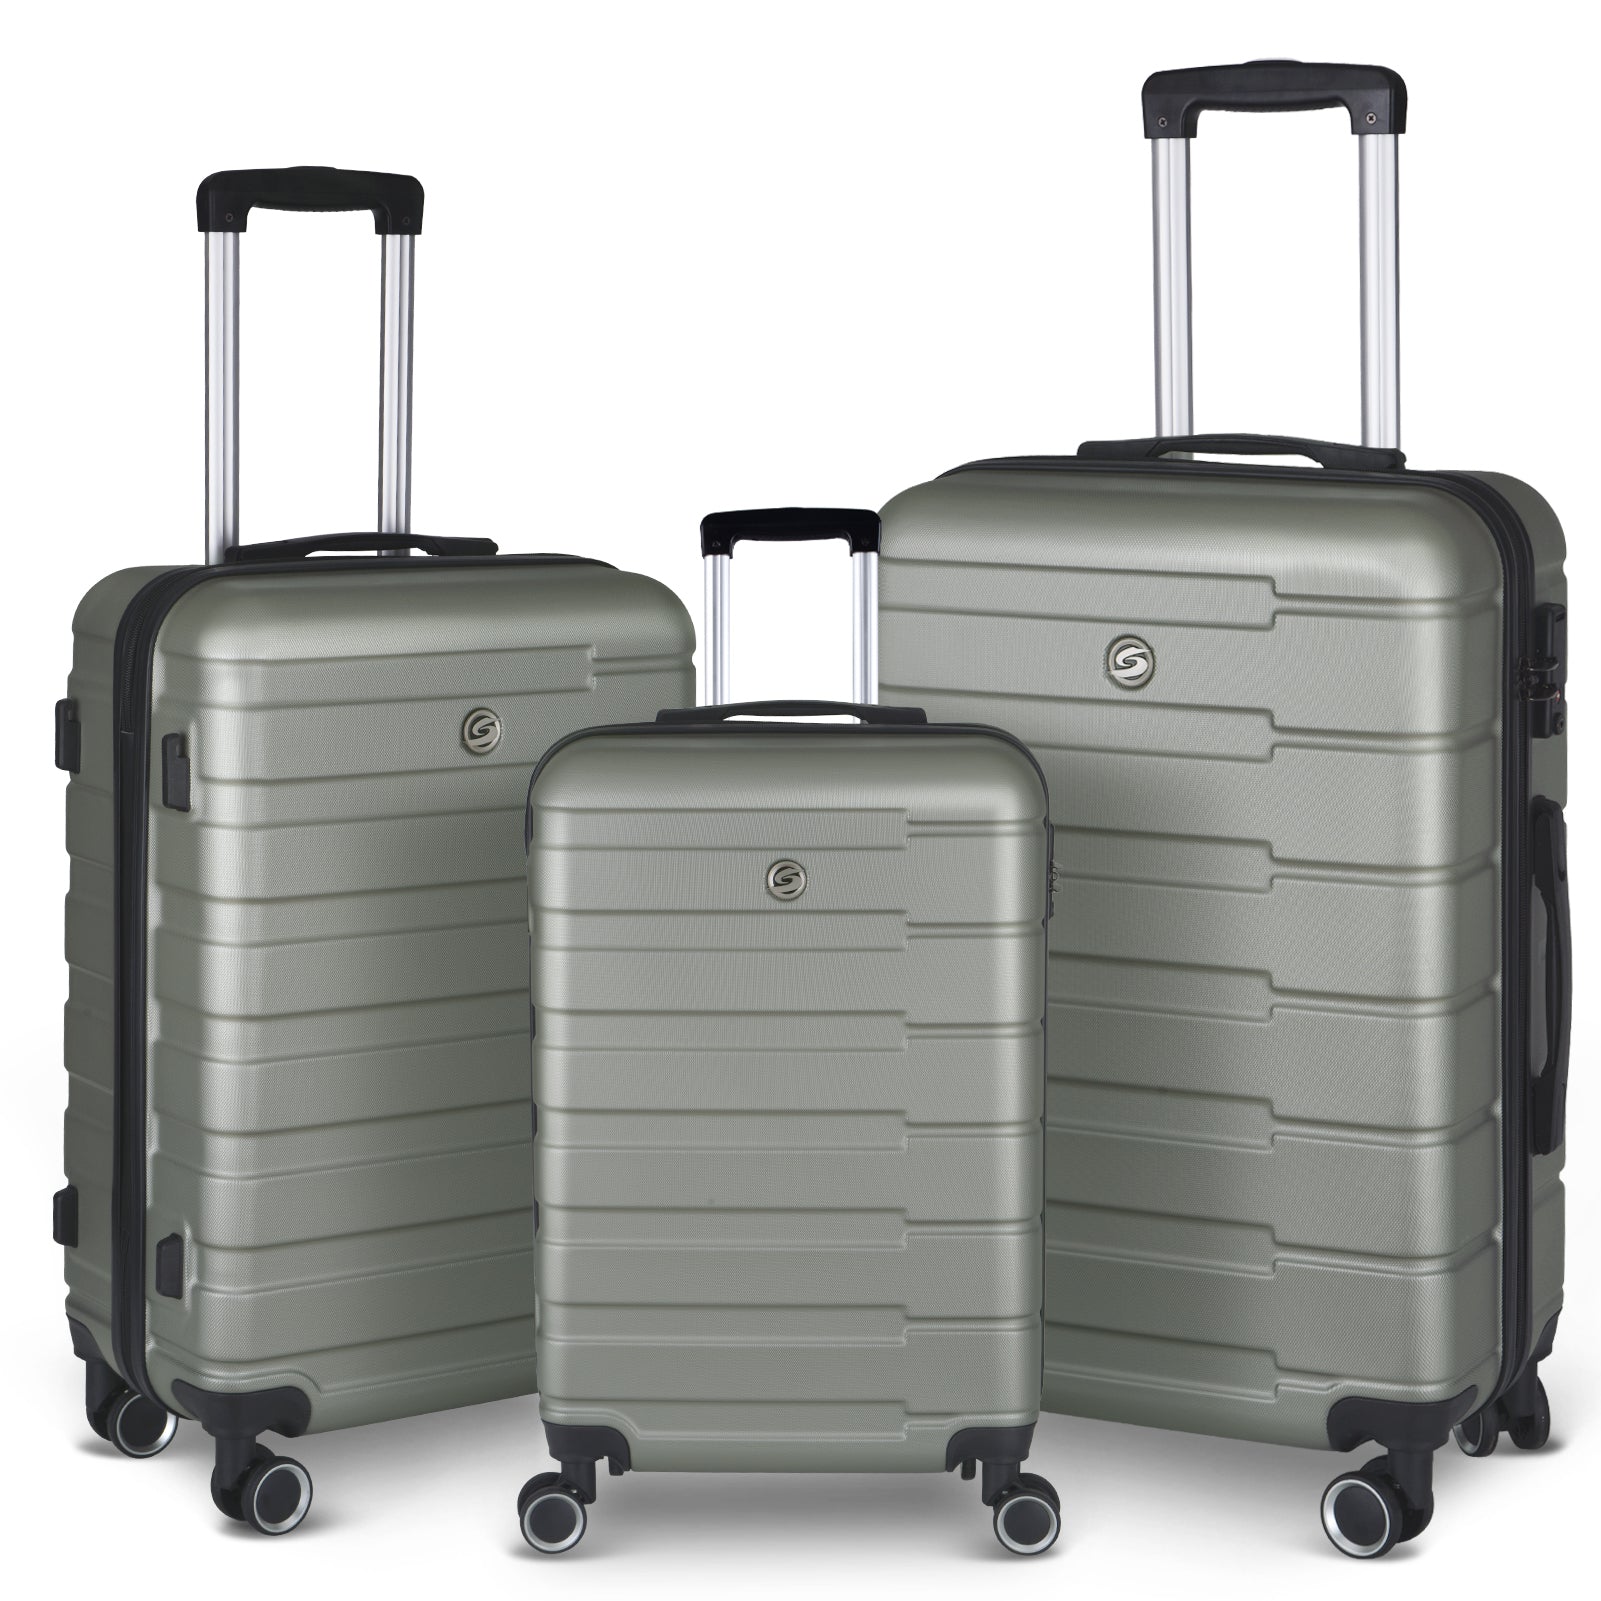 Luggage Suitcase 3 Piece Sets Hardside Carry on cement grey-abs